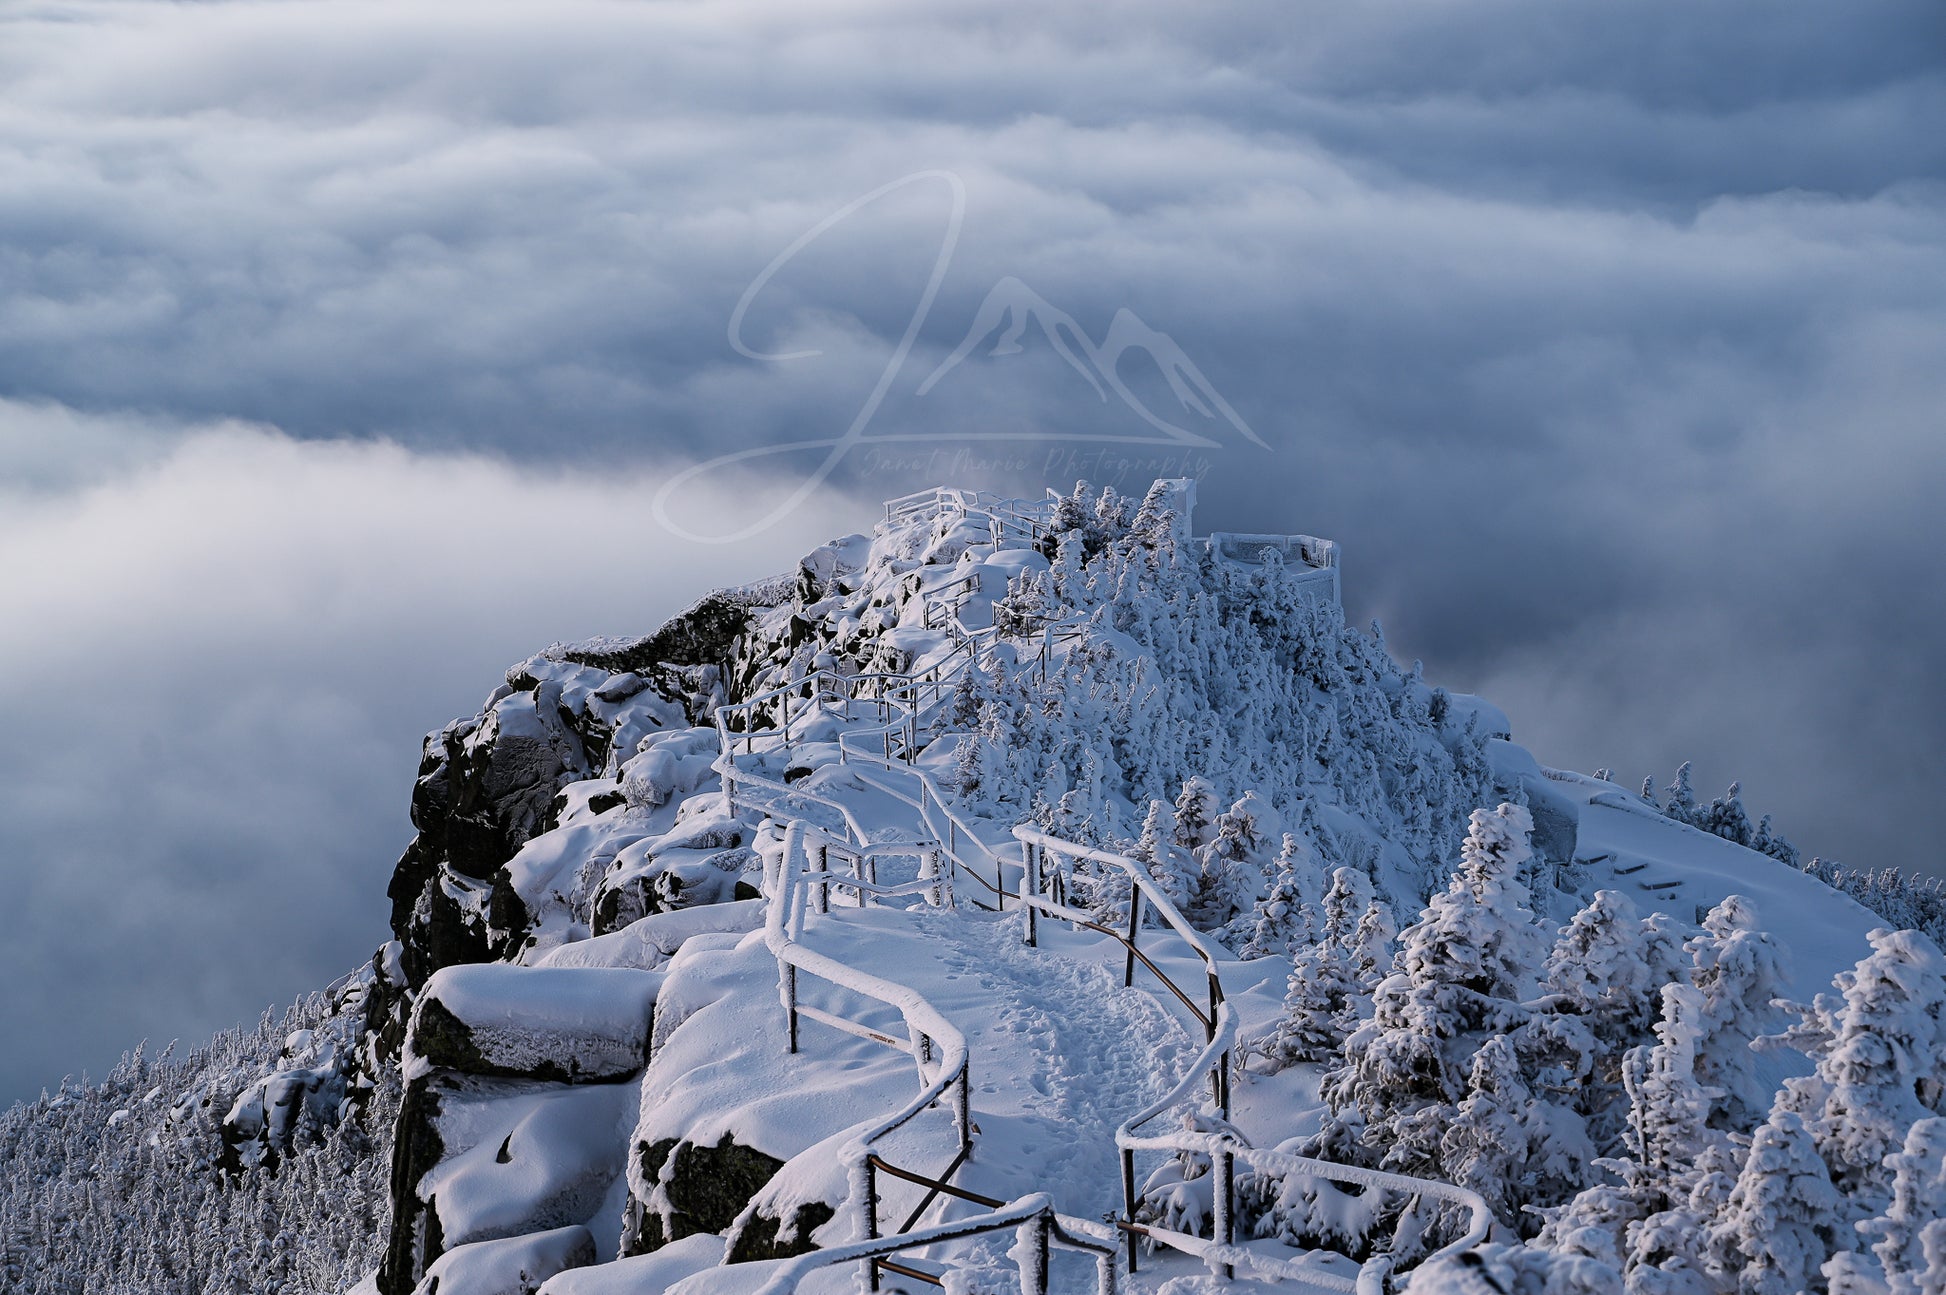 Castle in the Clouds - Whiteface Mountain Print